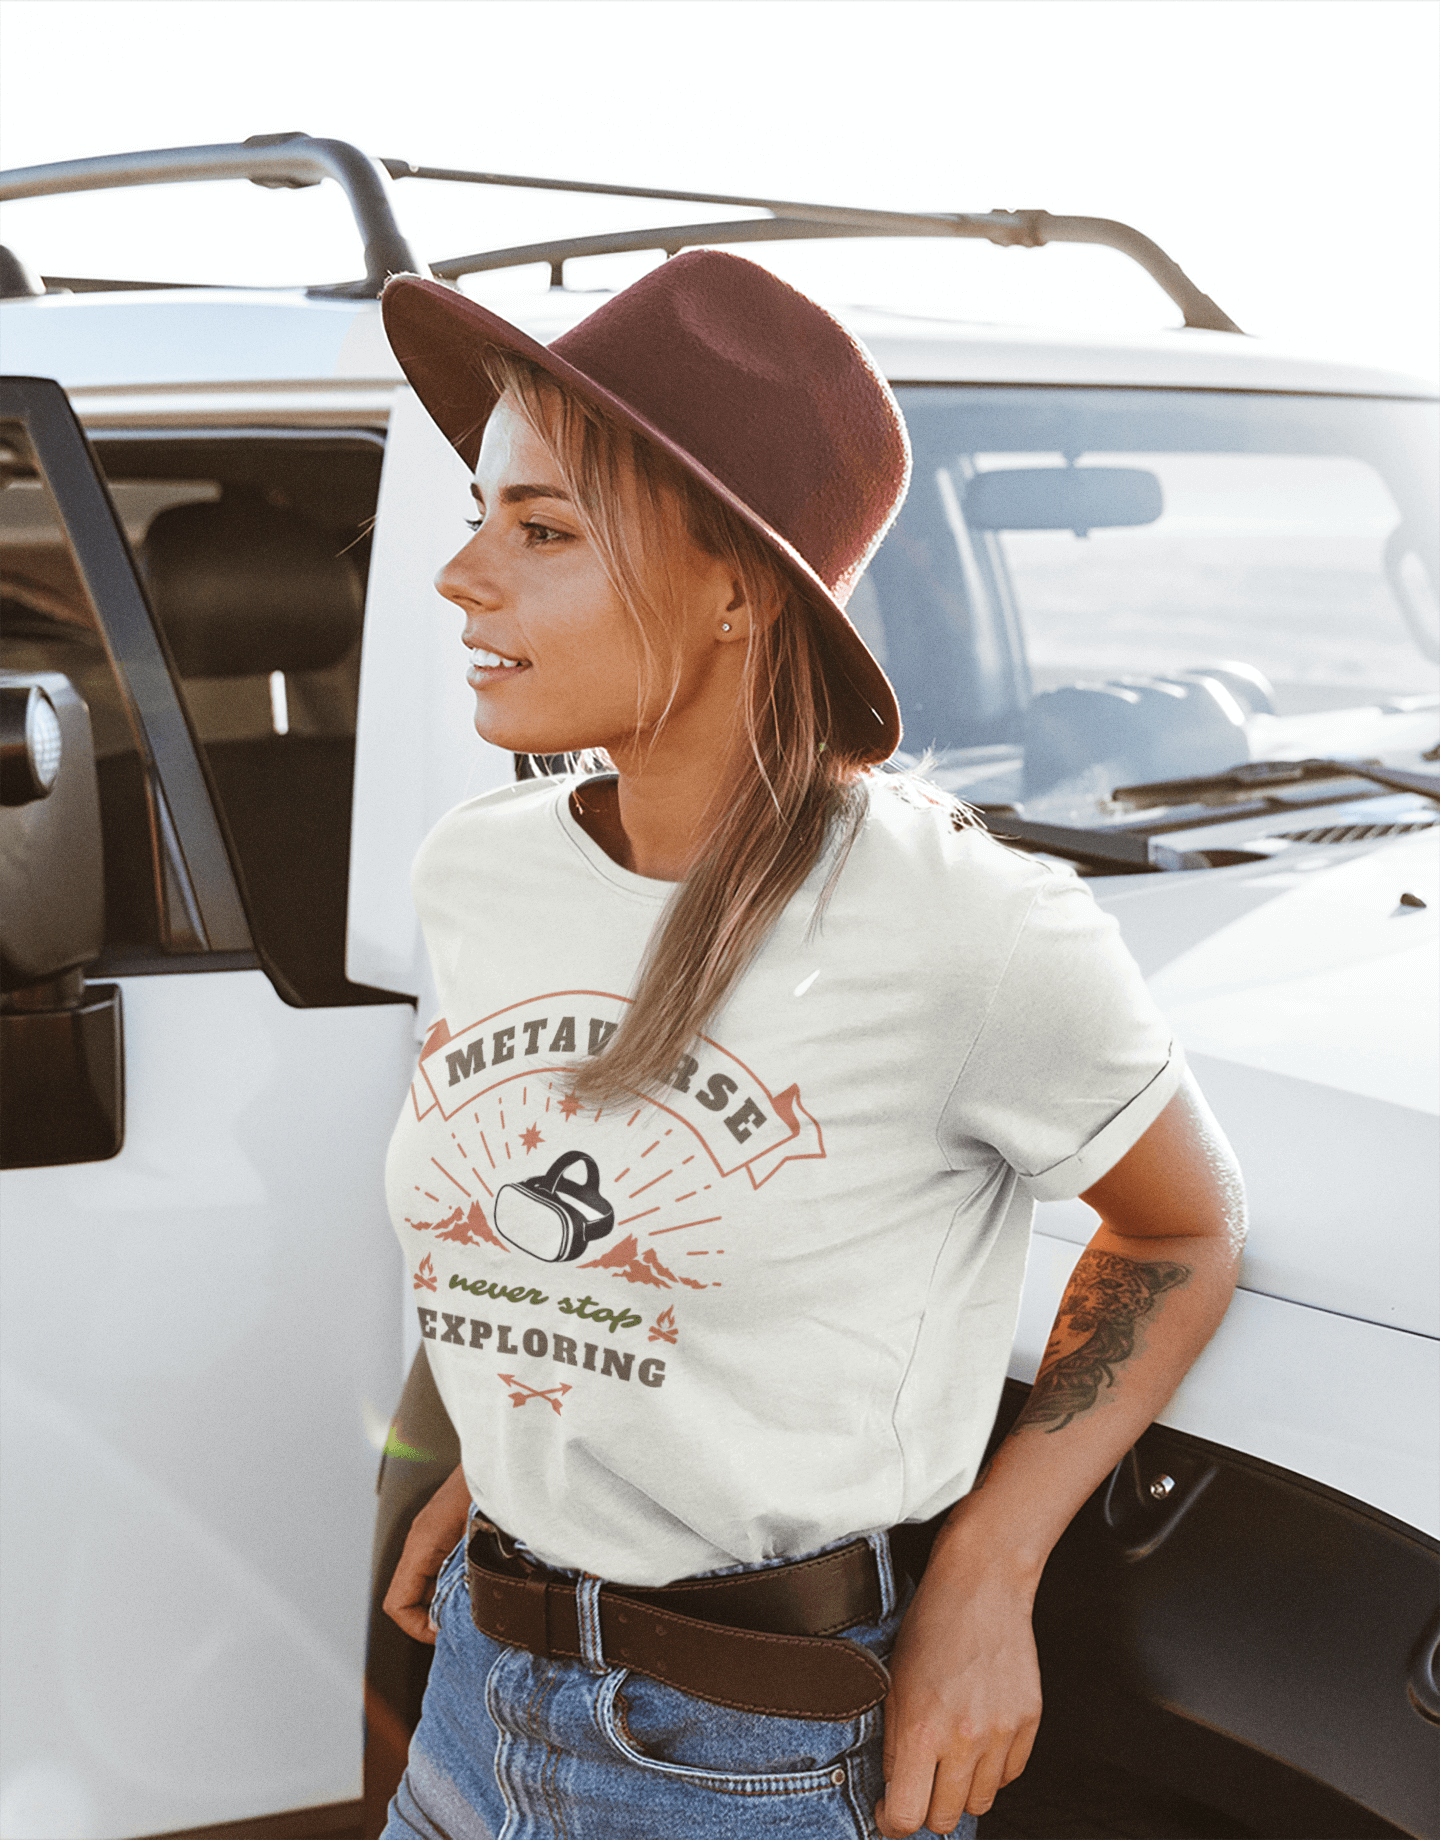 Woman leaning on jeep wearing Metaverse NFT T-Shirt